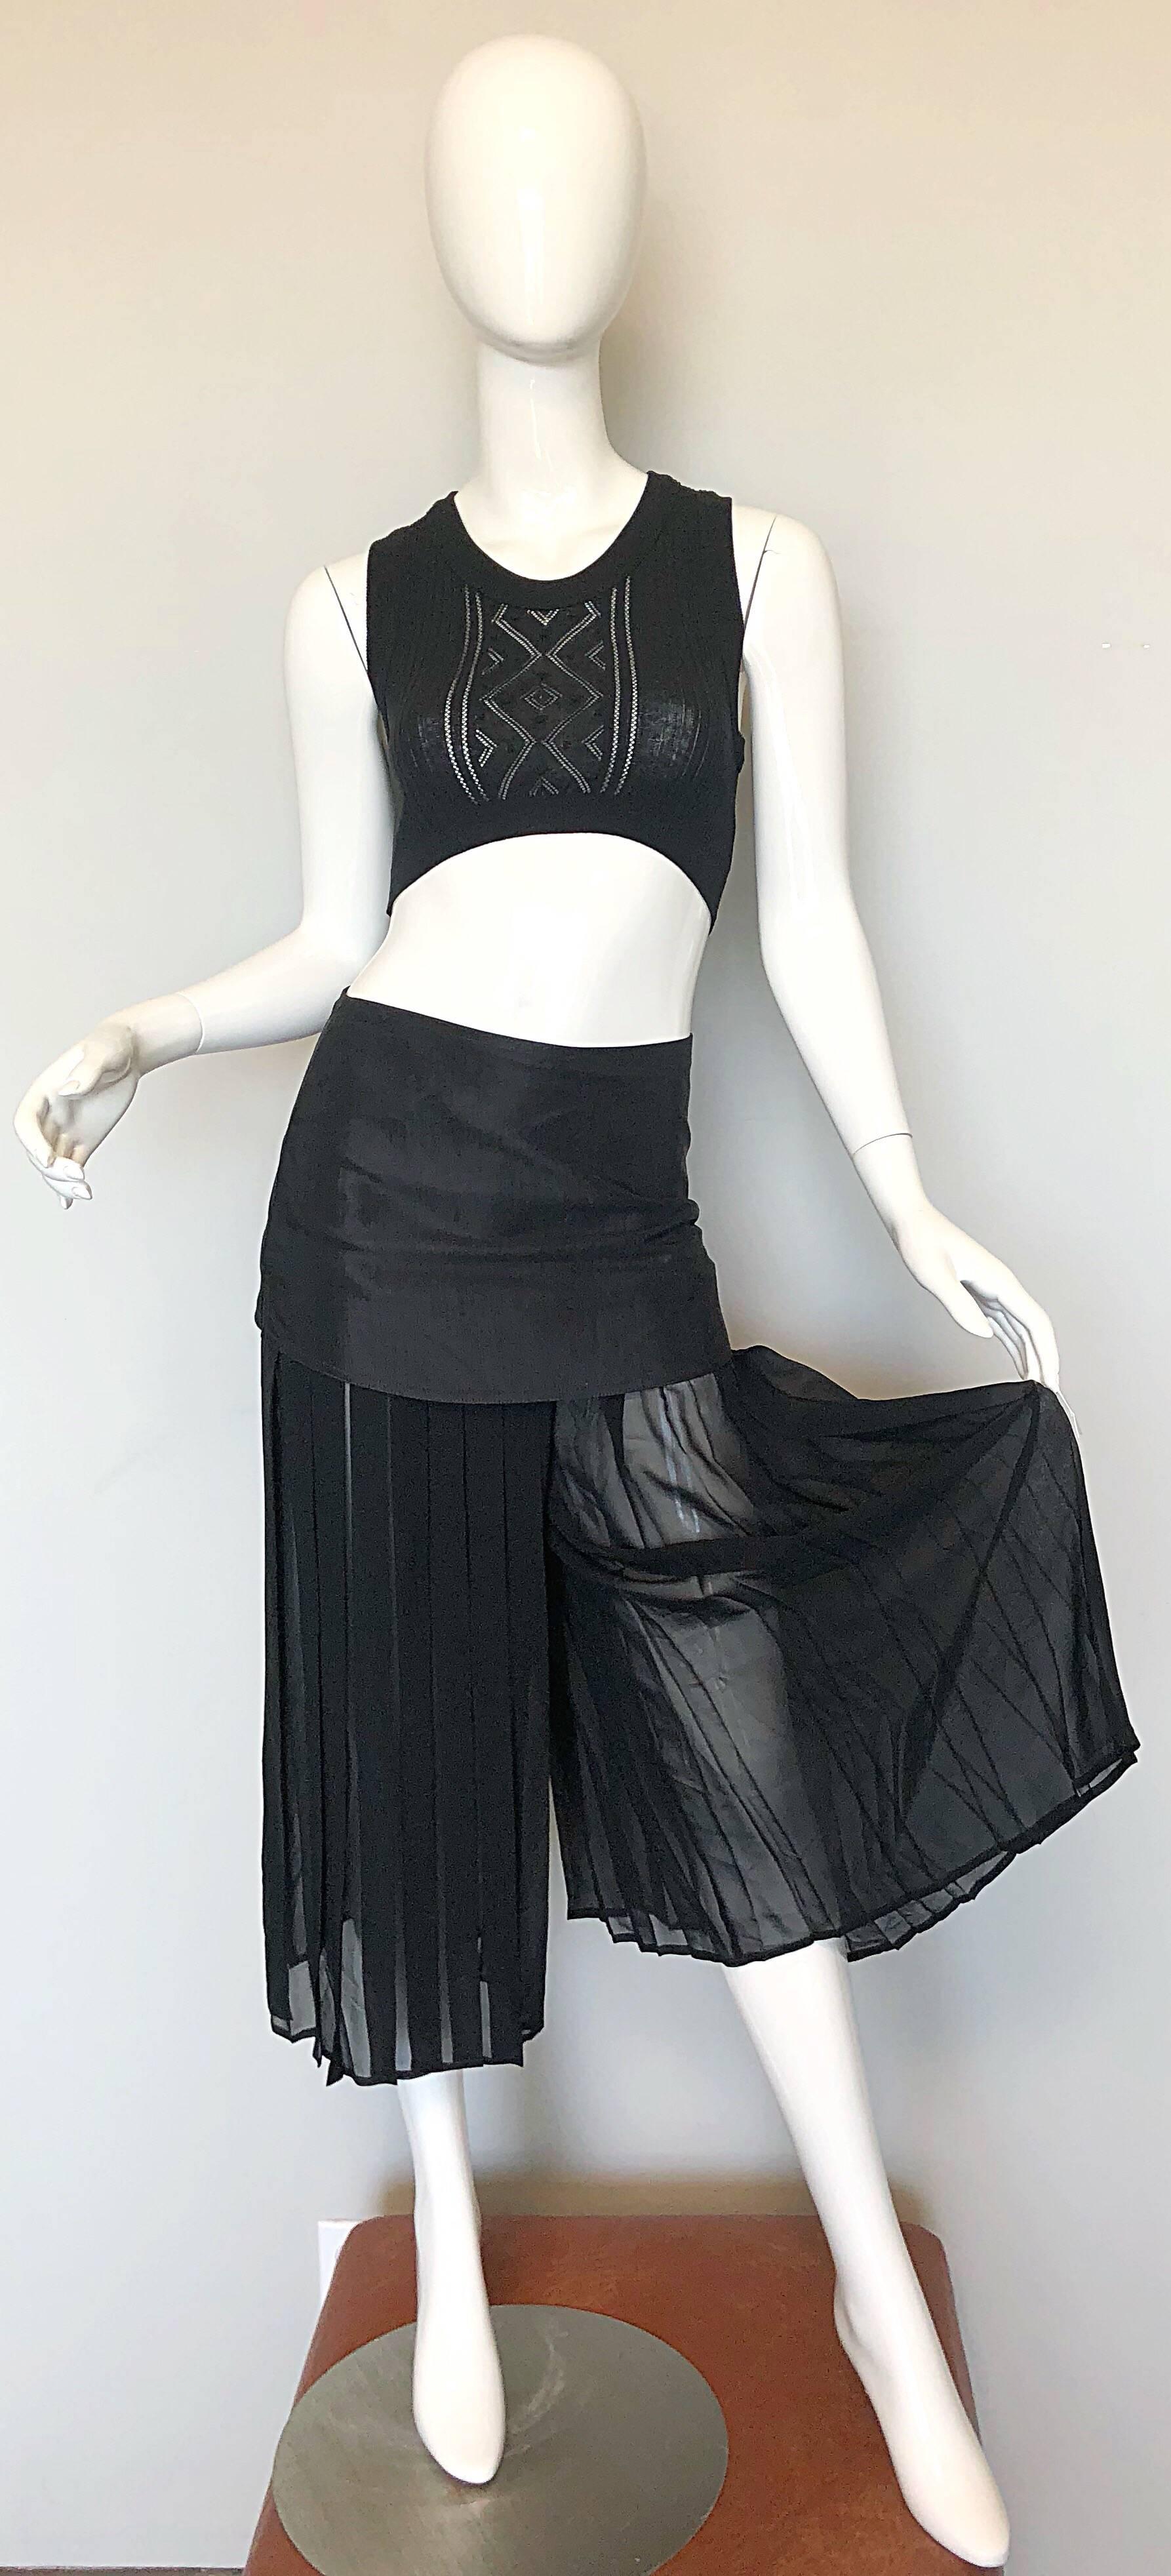 Chic 90s Italian made black vintage silk chiffon wide leg cropped culottes with attached mini skirt! Features semi sheer accordian pleated chiffon pants with an attached mini skirt. Hidden zipper up the side with hook-and-eye closure. Extremely well